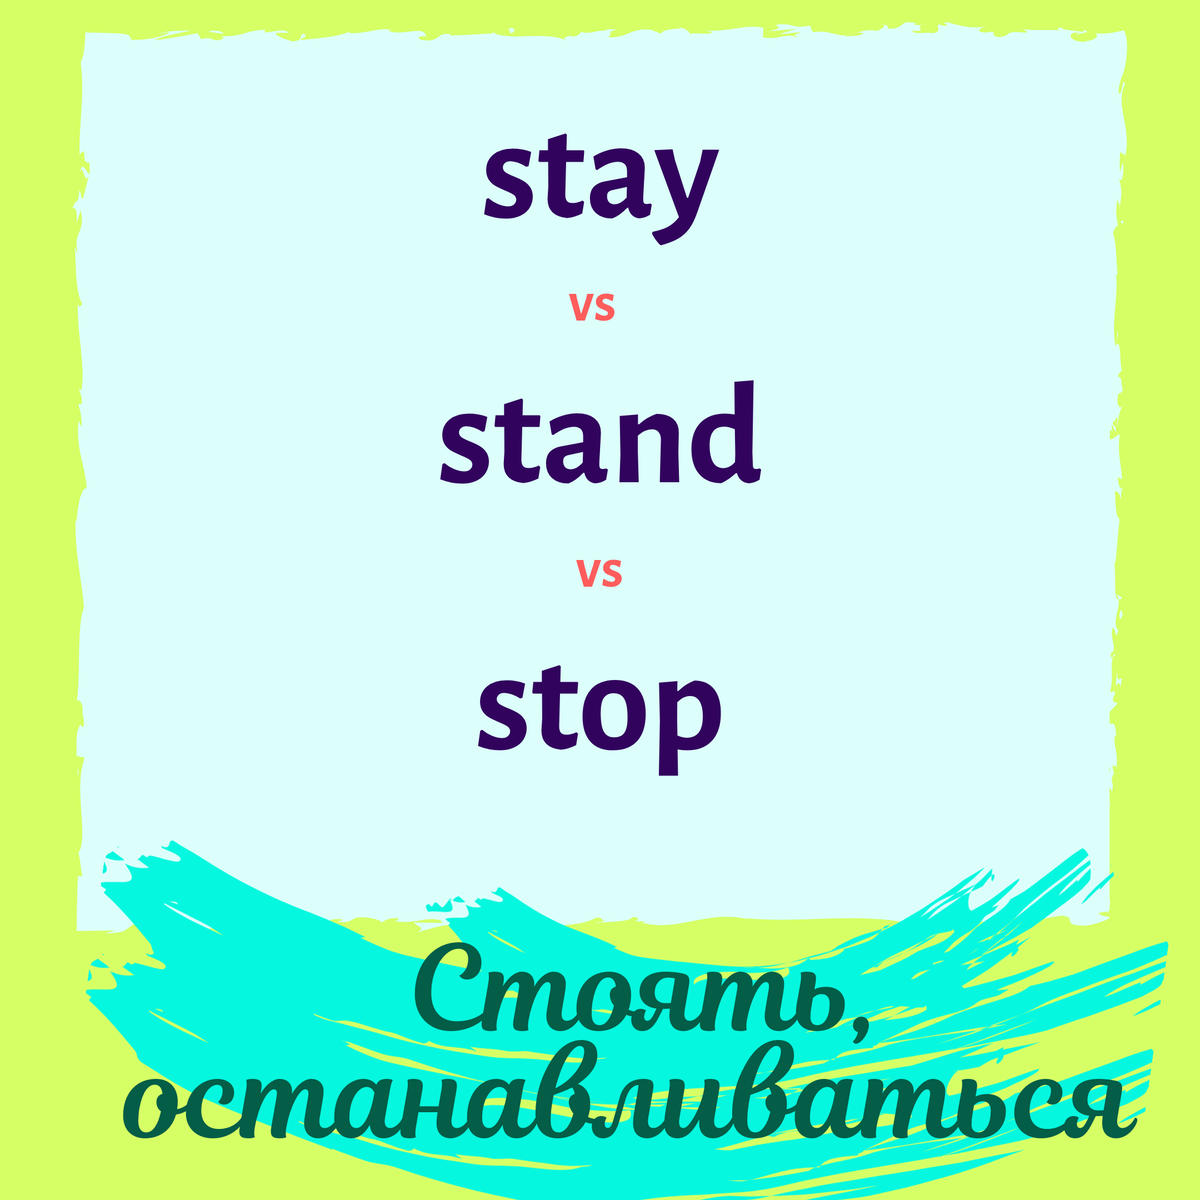 Stay stood stood. Stay Stand. Stay слова. Stand слово. Формы слова Stand.